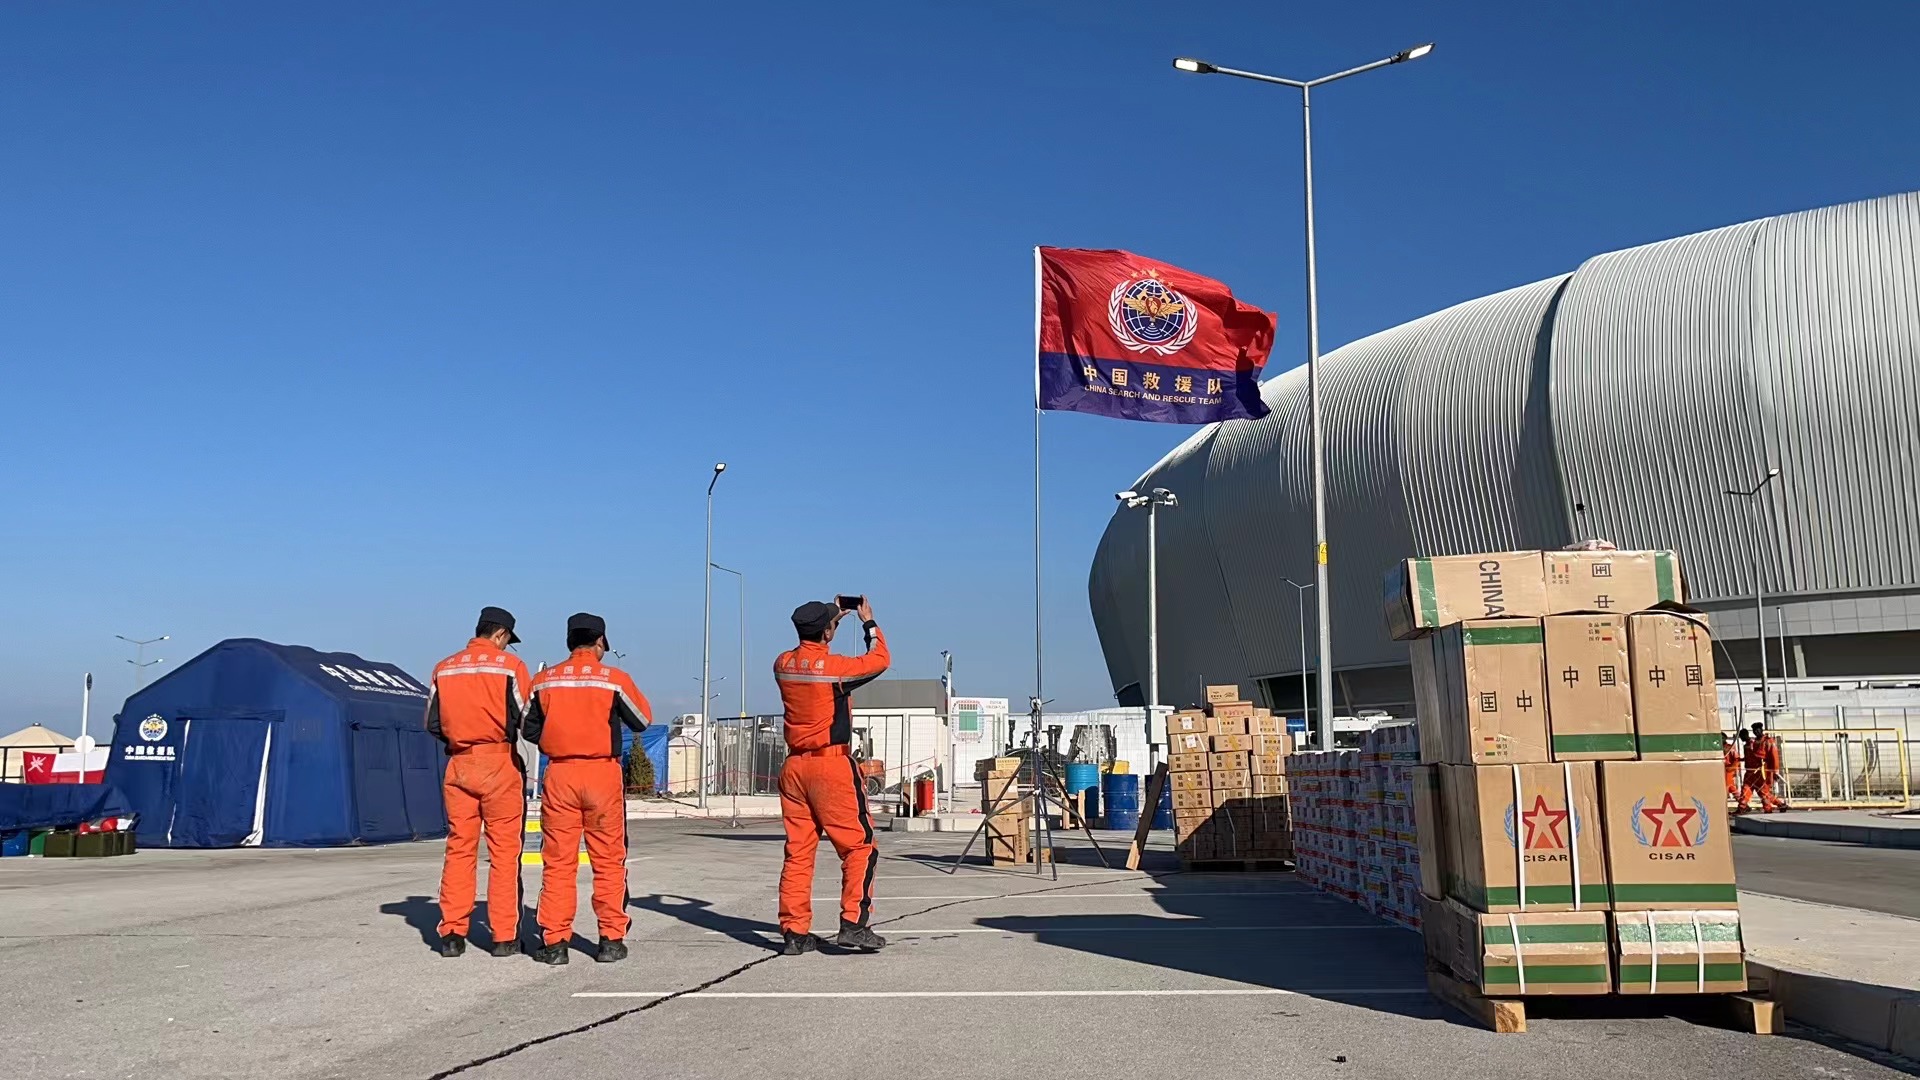 Live: China Search and Rescue Team completes its mission in Türkiye